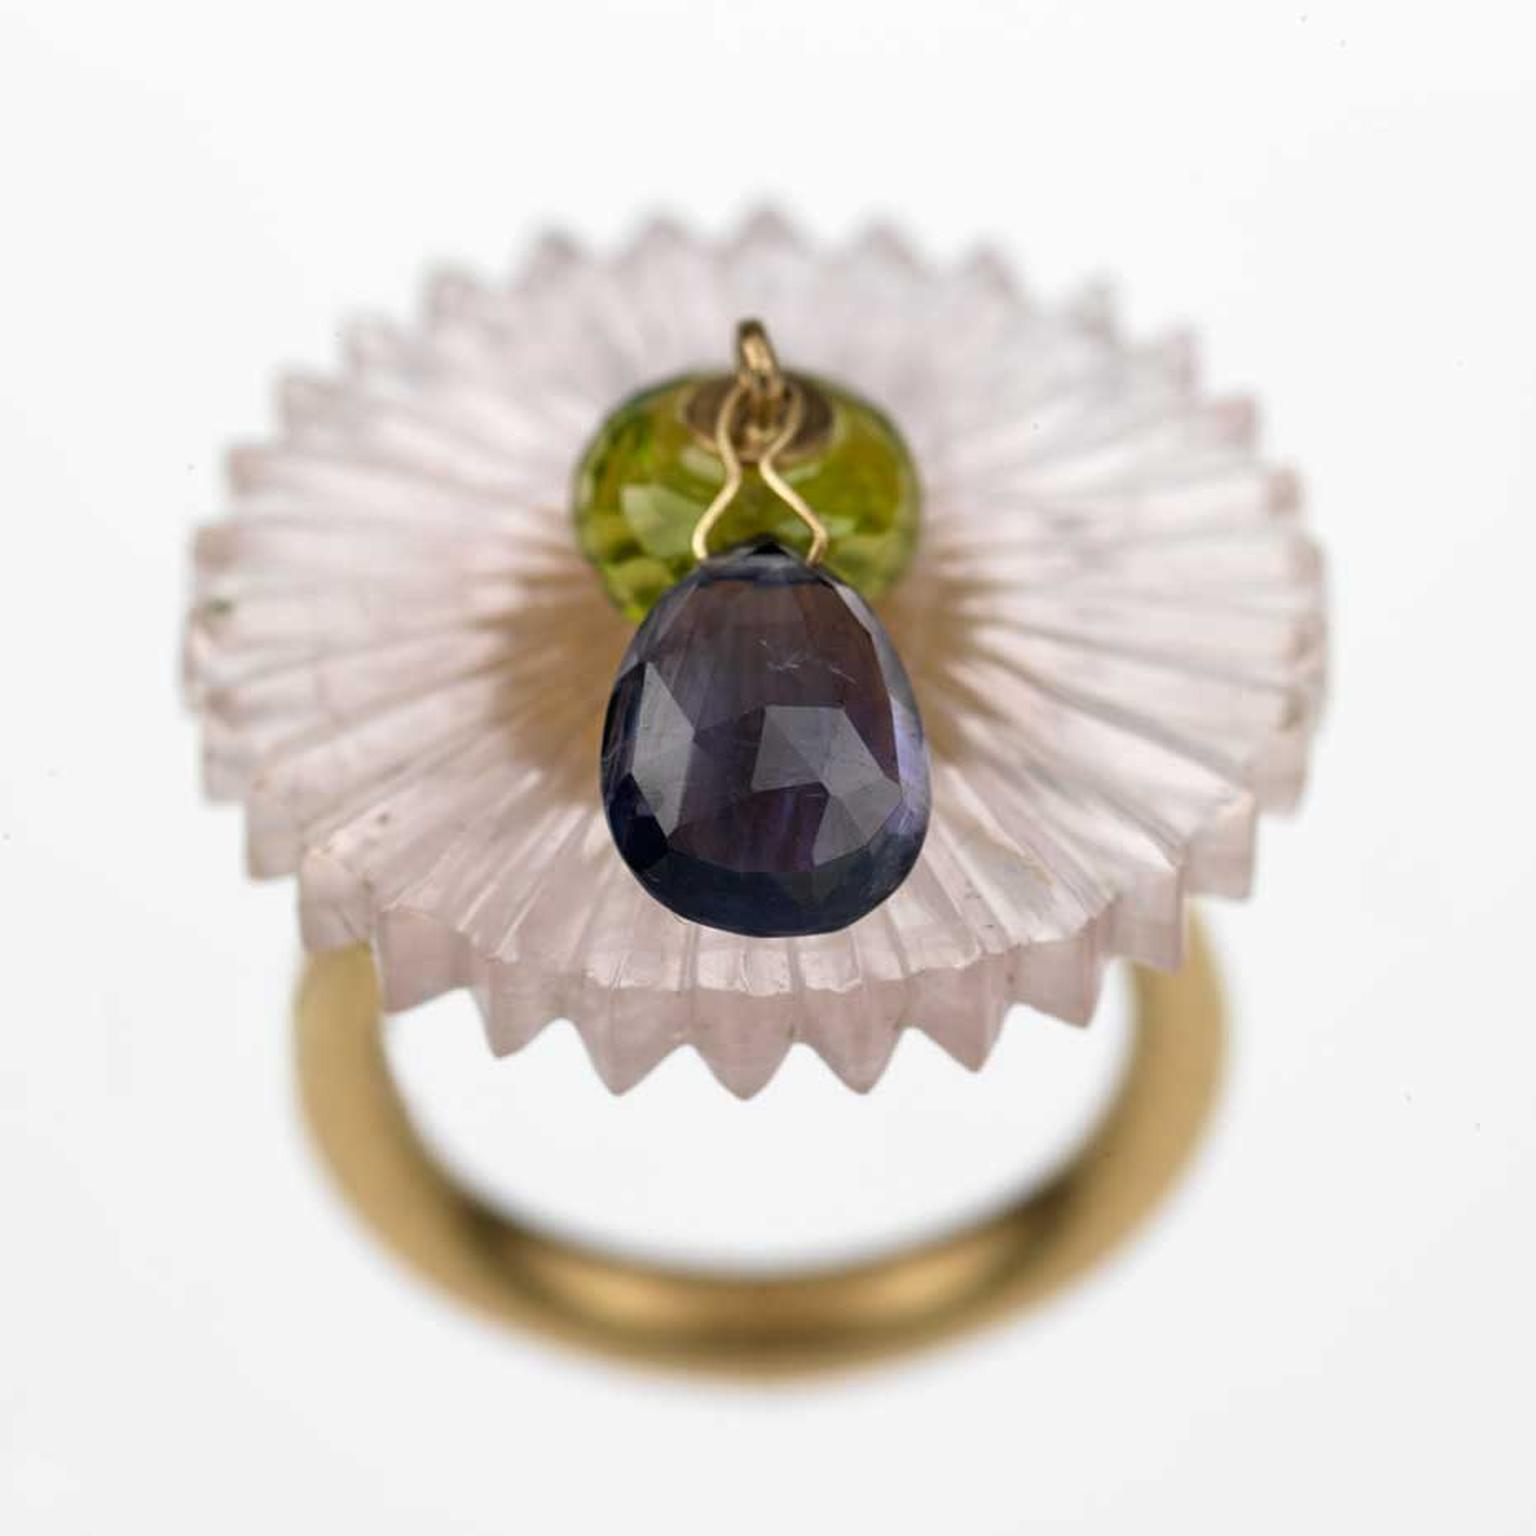 Alice Cicolini disk ring in gold with peridot bead and iolite drop from the Stone Temple series.